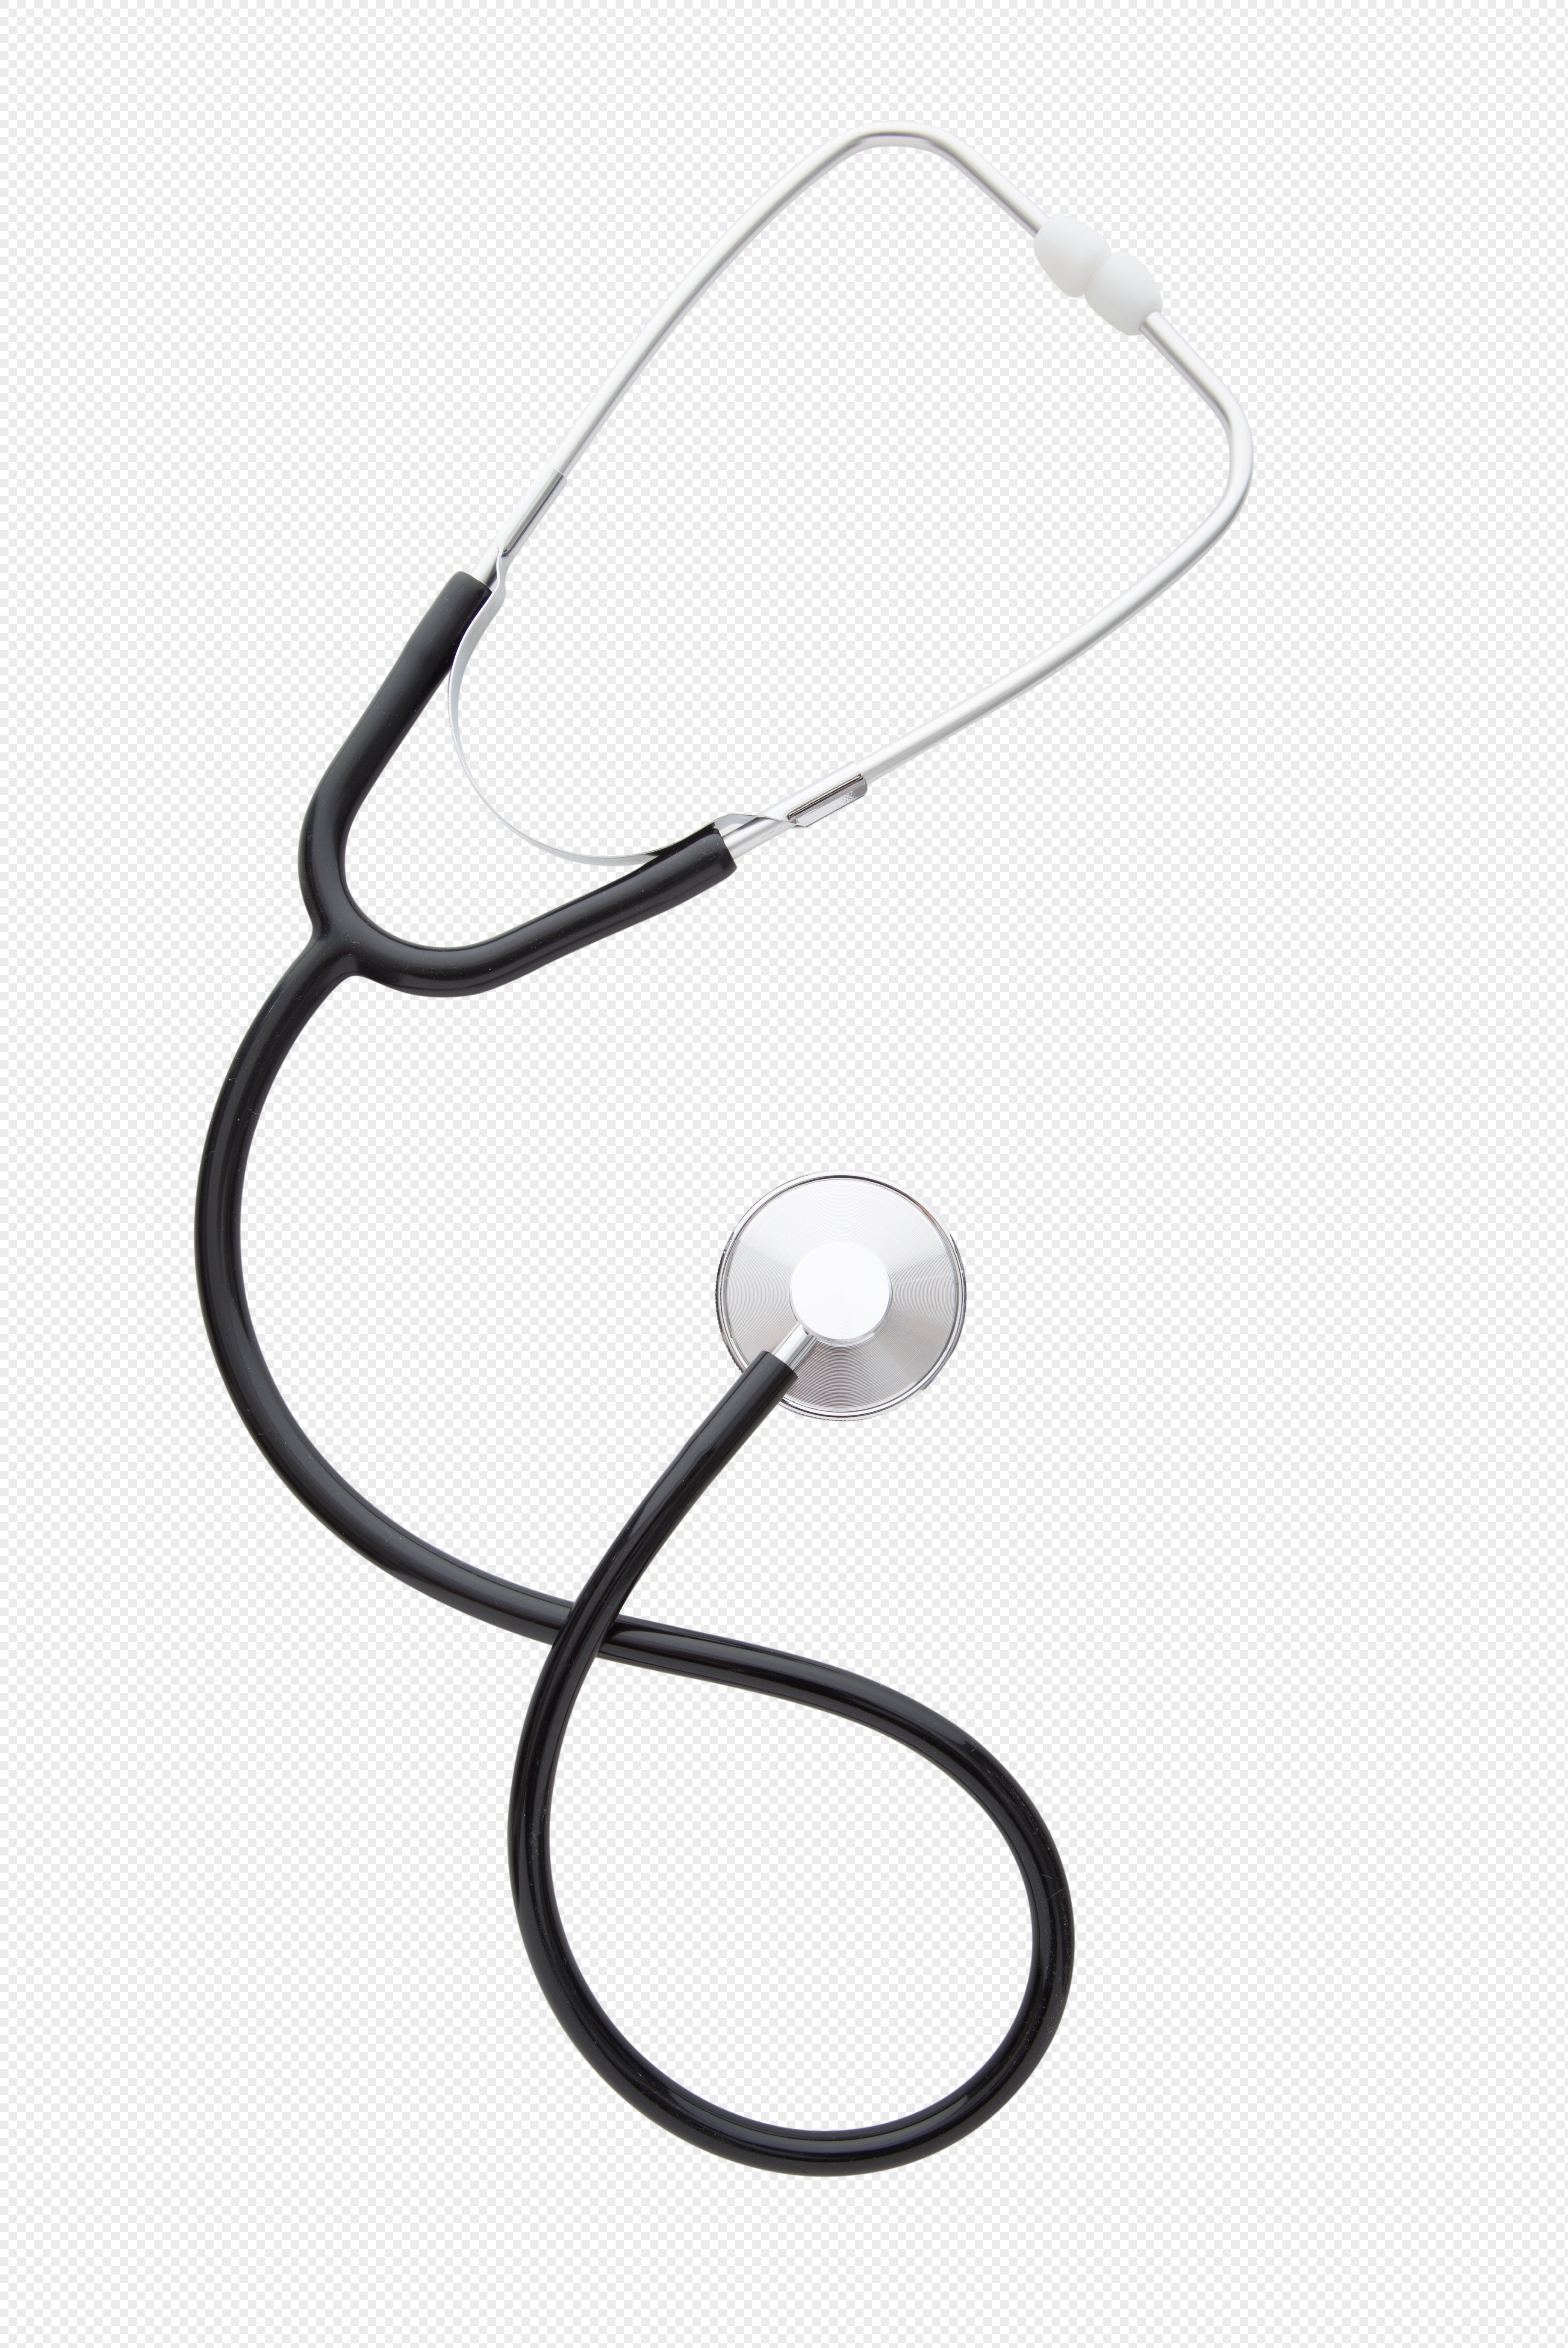 Black Stethoscope Images, HD Pictures For Free Vectors Download -  